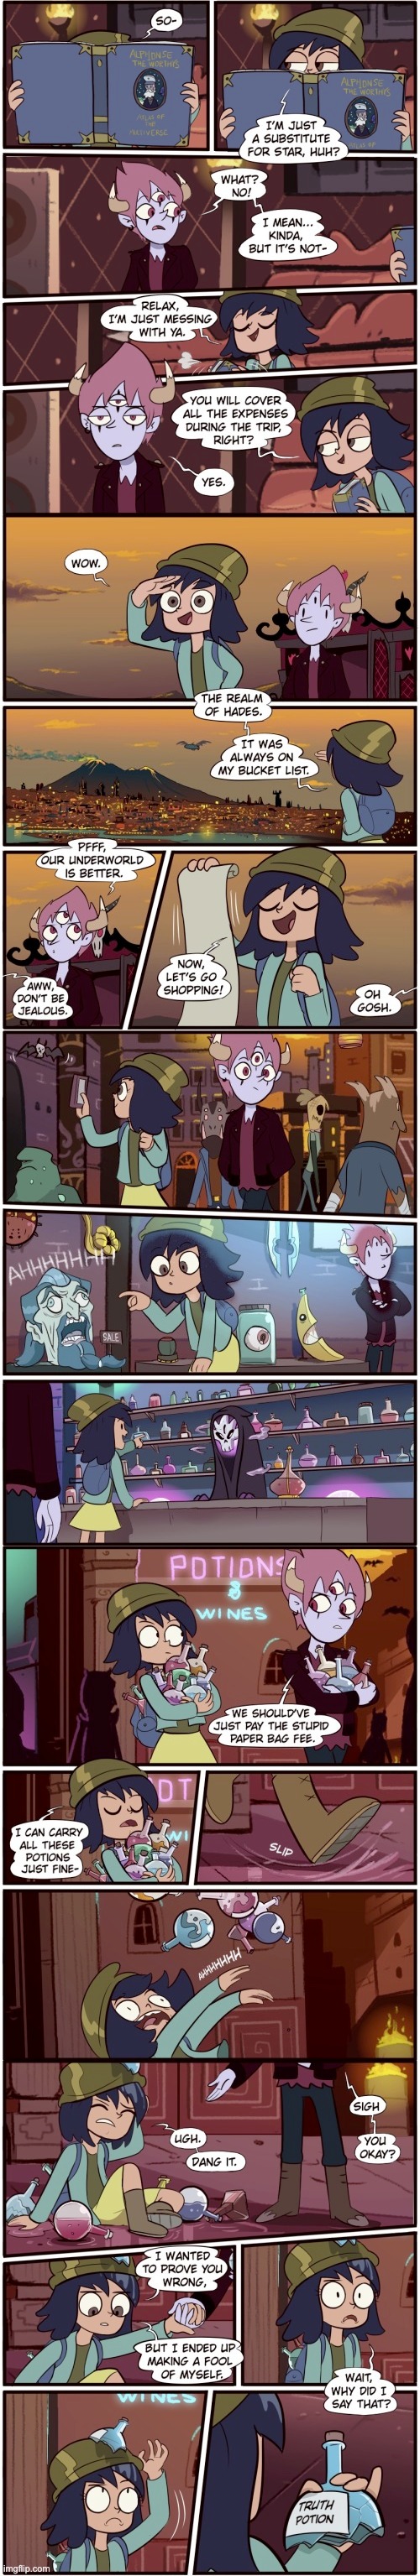 Tom vs Jannanigans: Are We There Yet? (Part 2) | image tagged in morningmark,comics/cartoons,svtfoe,star vs the forces of evil,comics,memes | made w/ Imgflip meme maker